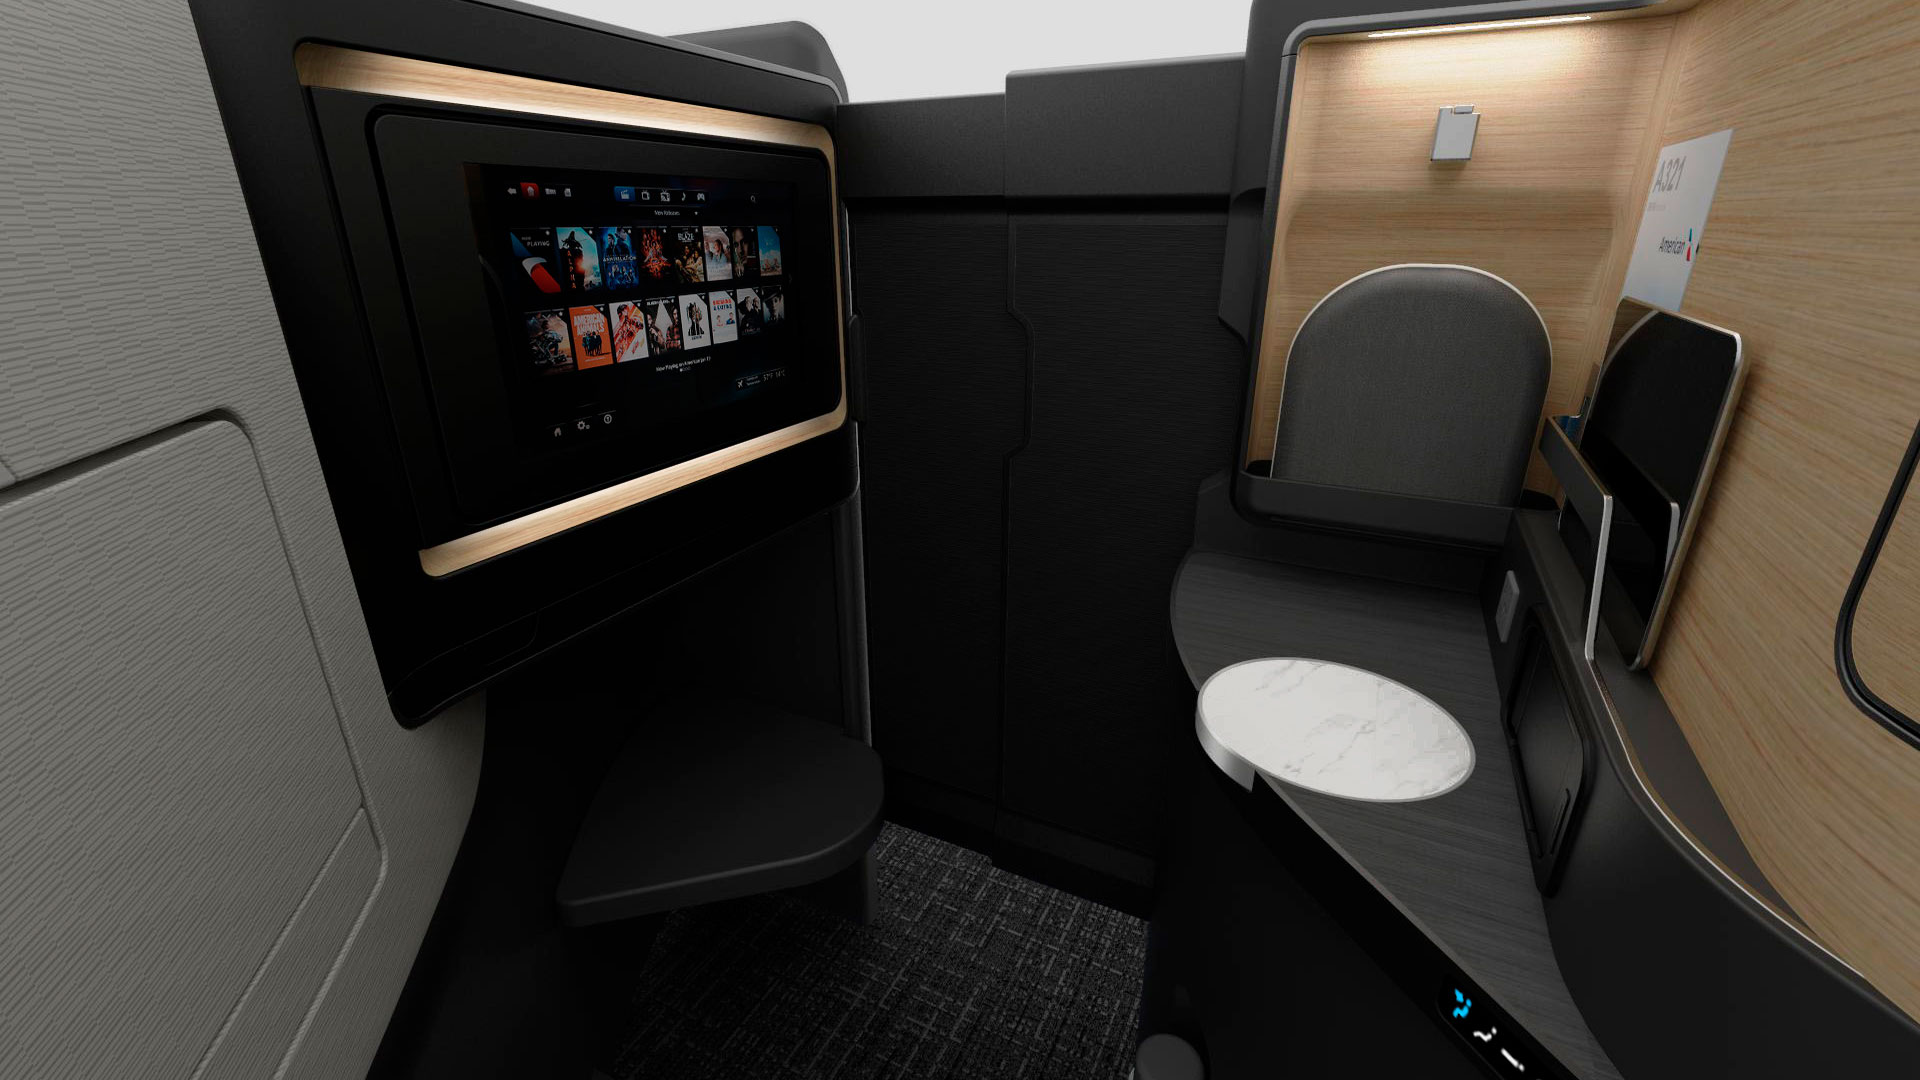 The airbus a321xlr flagship suite will give customers a personal experience on board